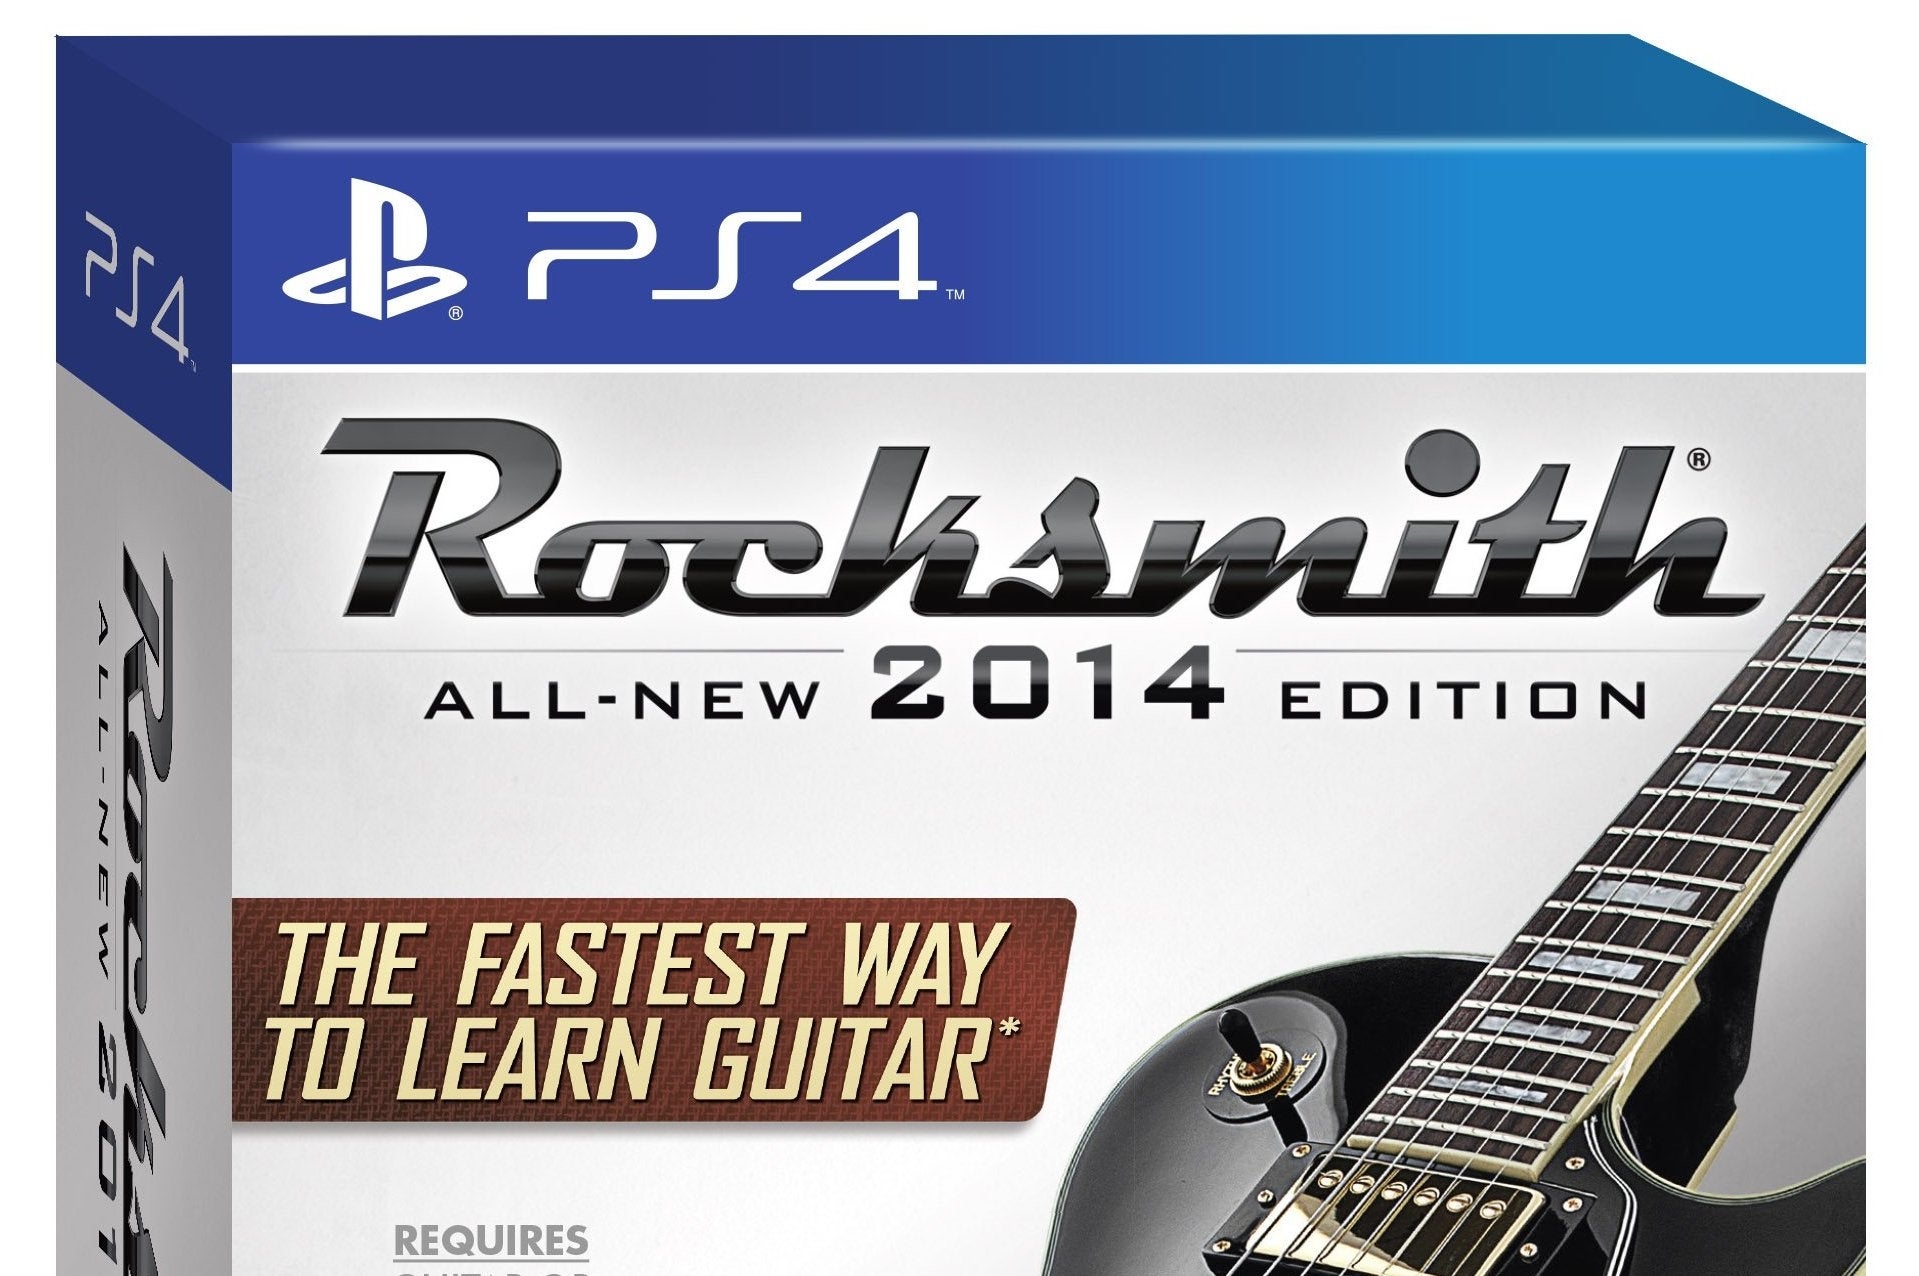 Image for Rocksmith 2014 Edition PlayStation 4 and Xbox One release date announced